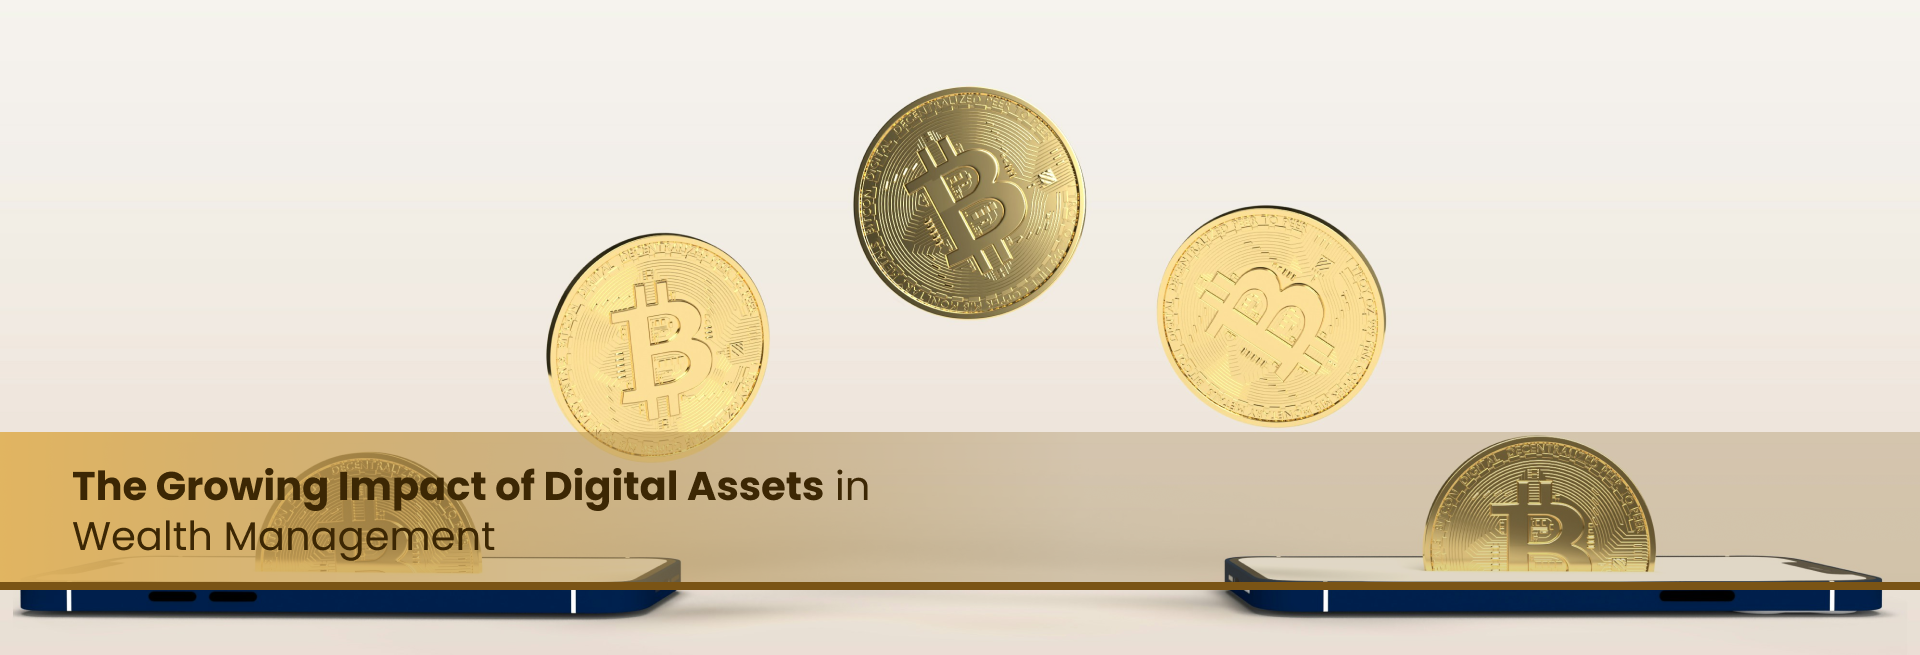 The Growing Impact of Digital Assets in Wealth Management